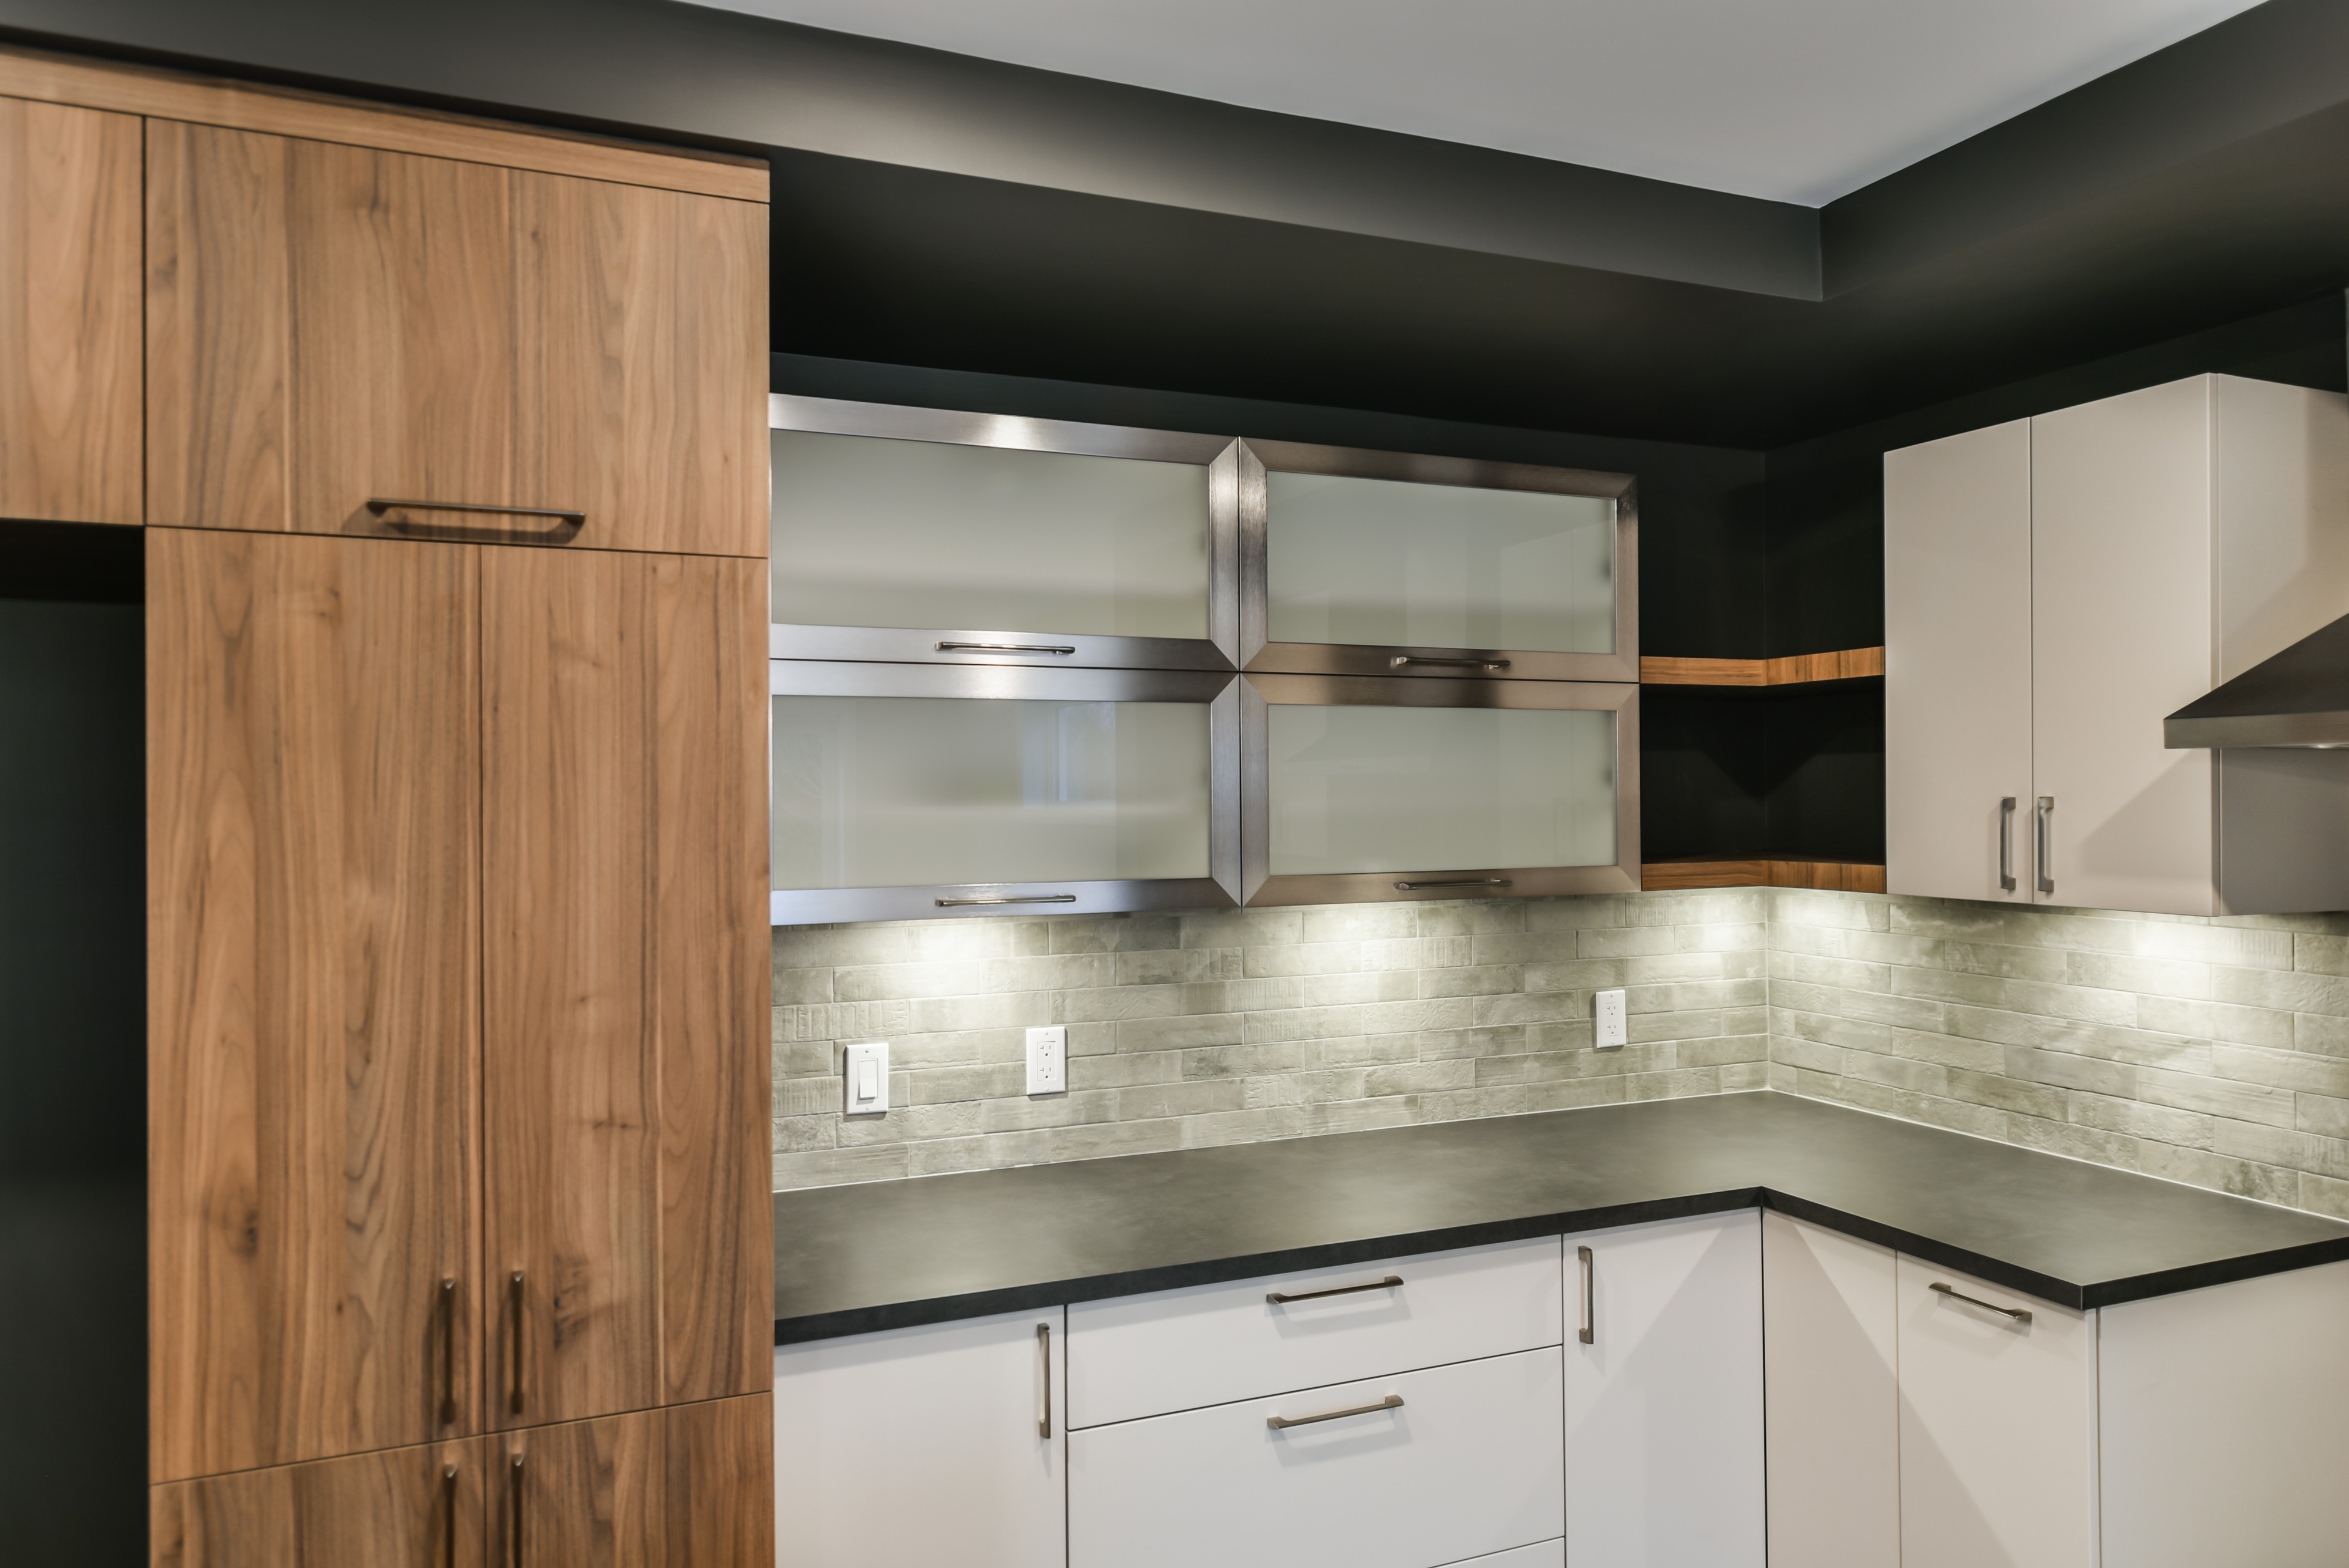 What kind of Paint Colour Finish to you use on Kitchen Cabinets: Choosing the Perfect Satin, Gloss, or Matte for Your Space